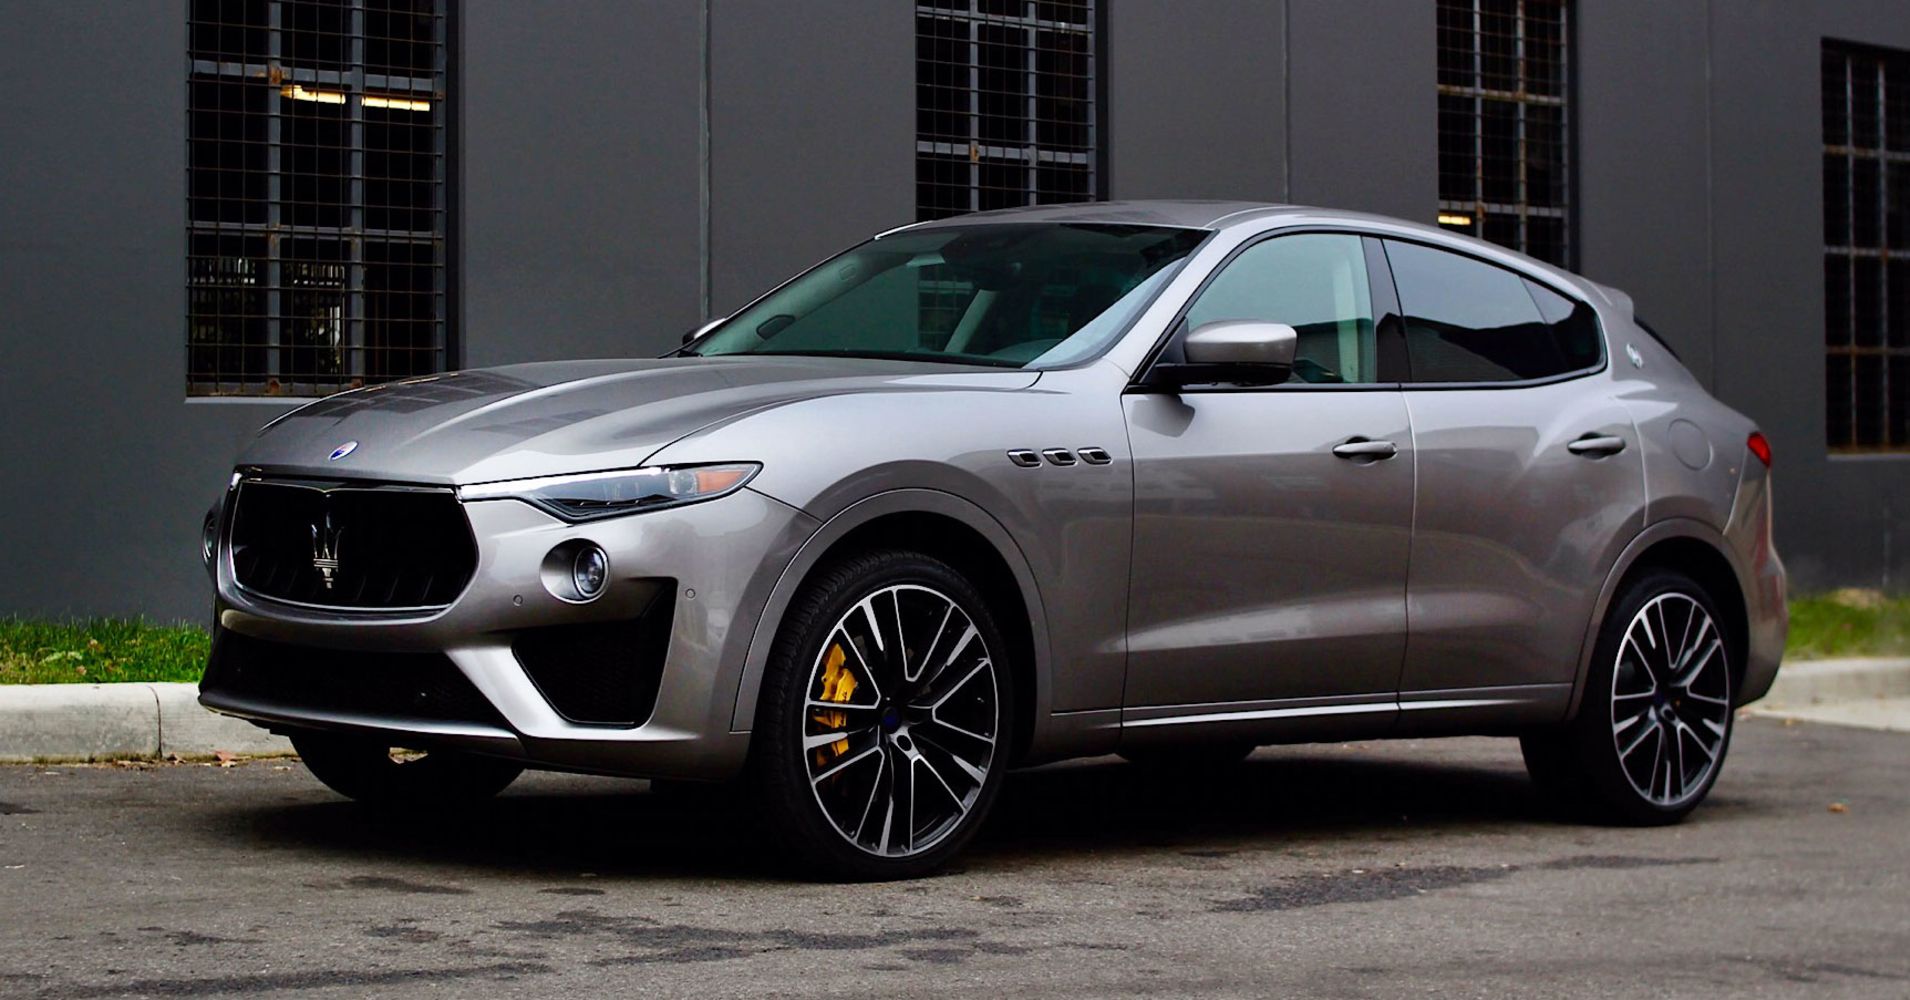 Review: 2019 Maserati Levante GTS is an SUV with a Ferrari V-8 engine that delivers on ...